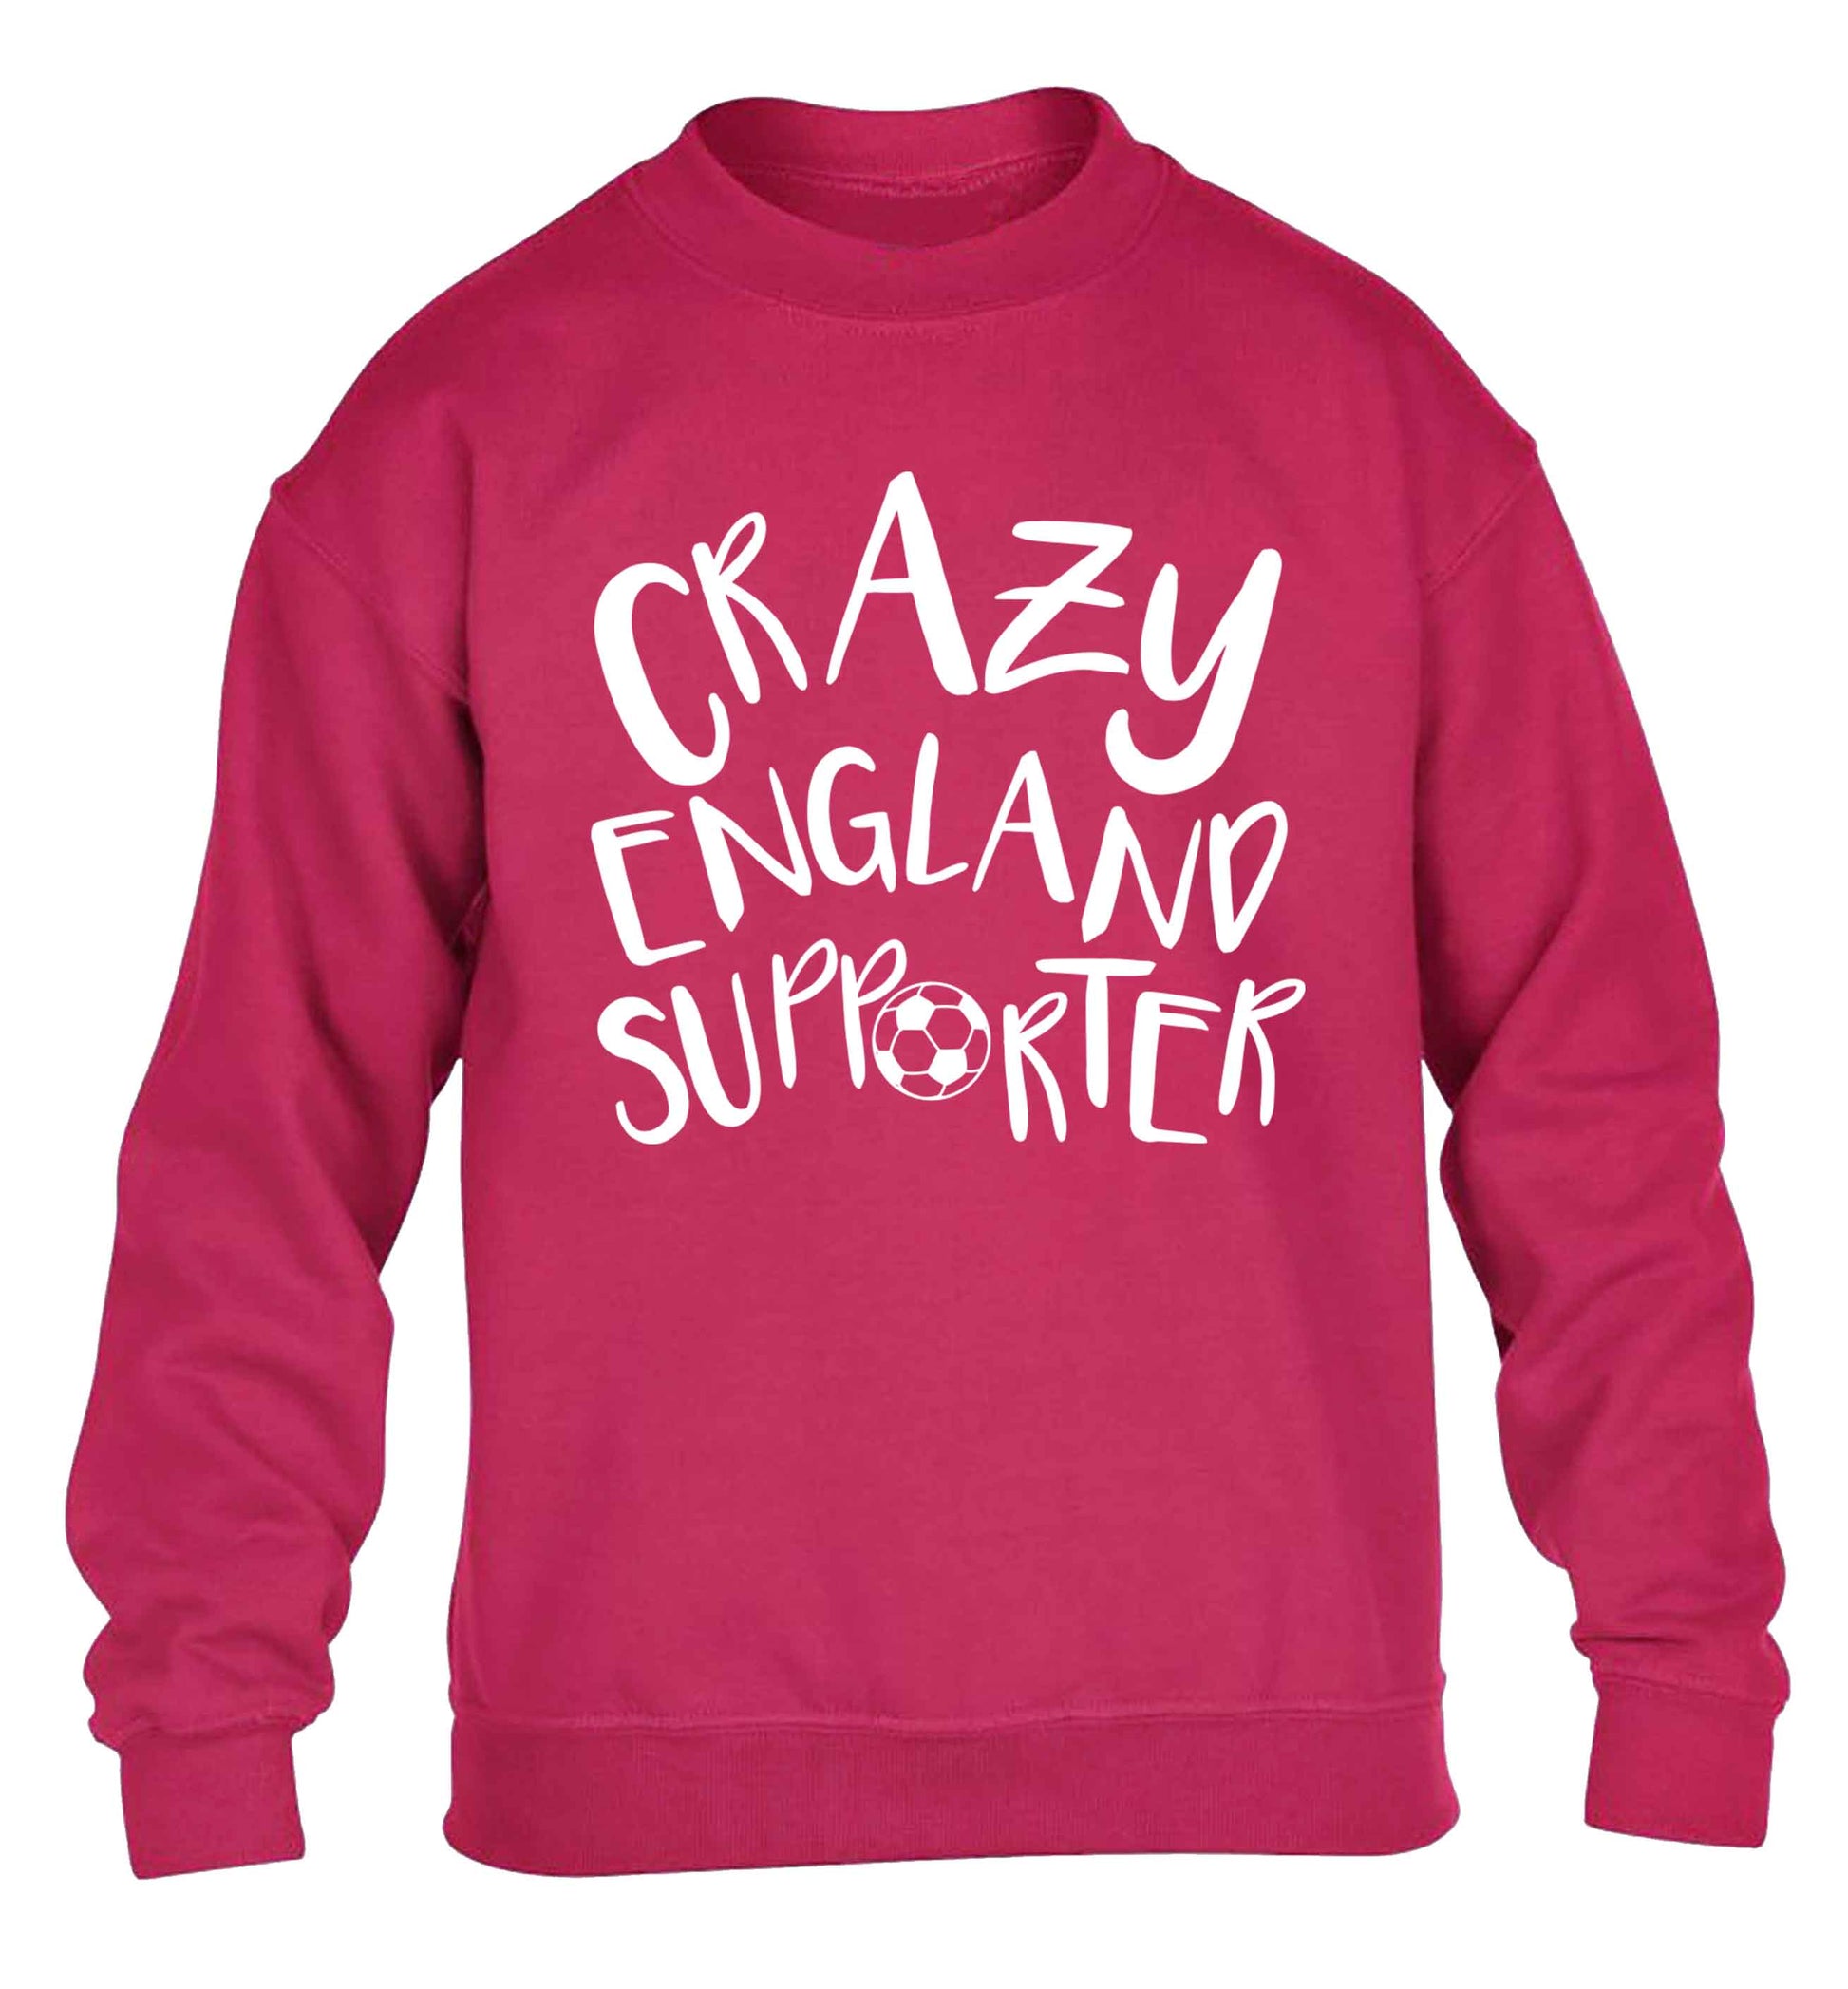 Crazy England supporter children's pink sweater 12-13 Years